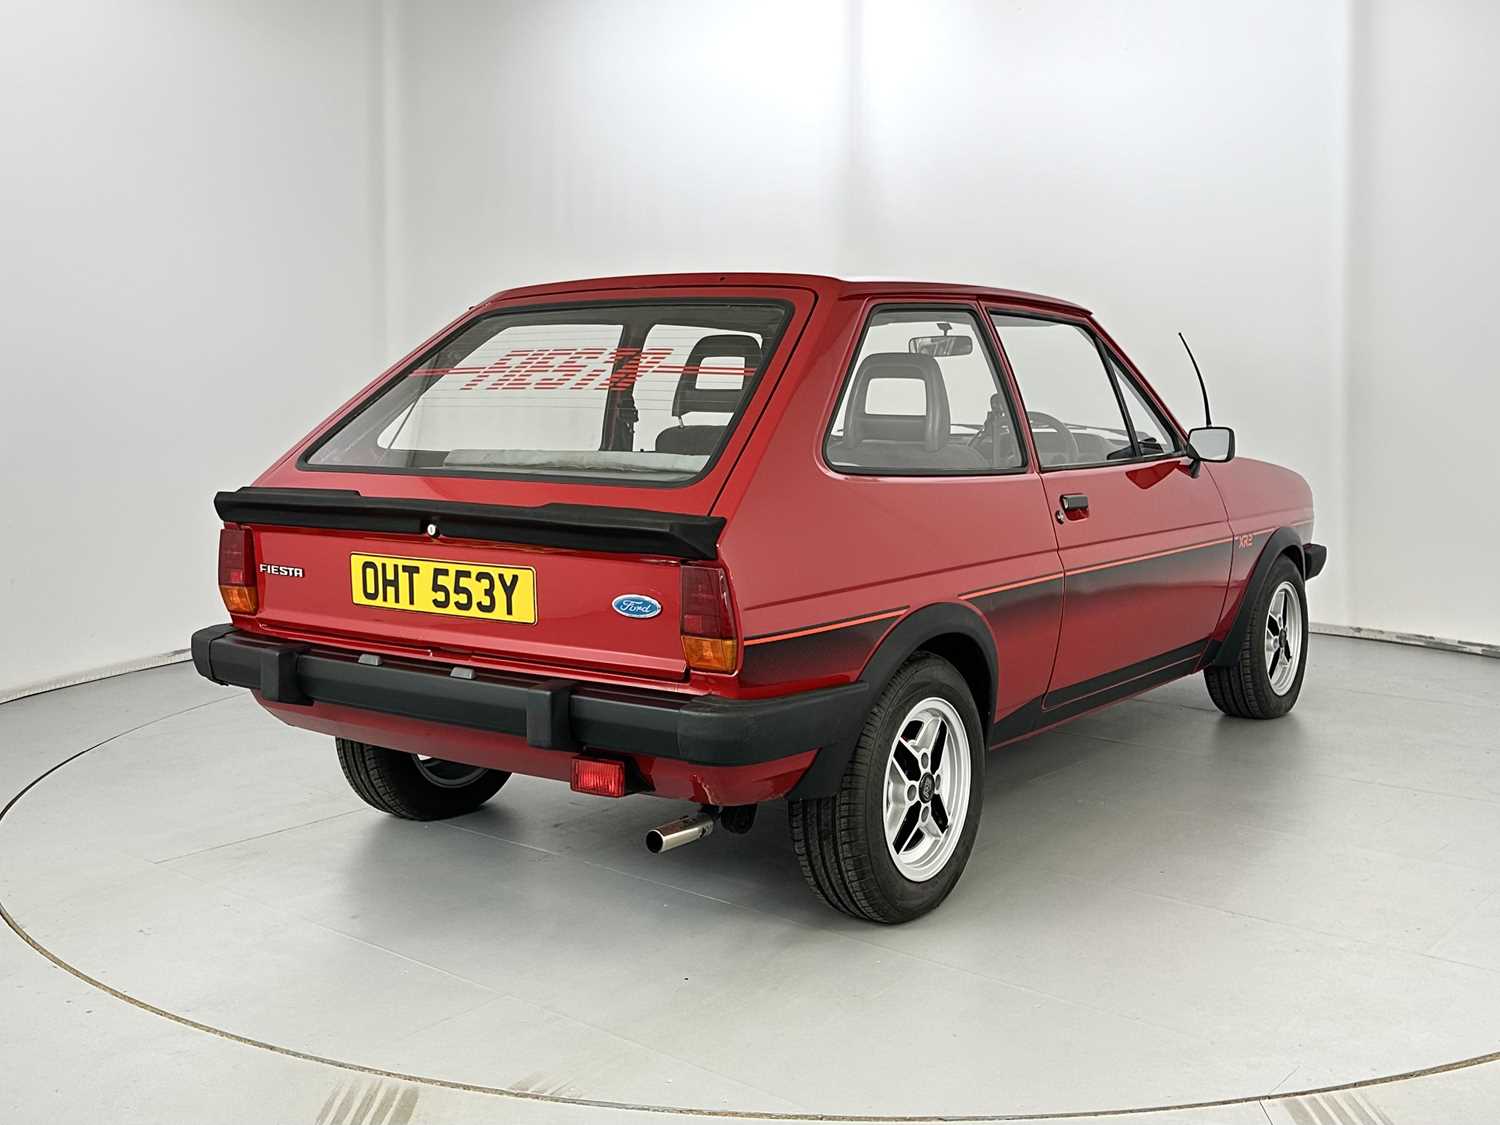 1983 Ford Fiesta - Image 9 of 31